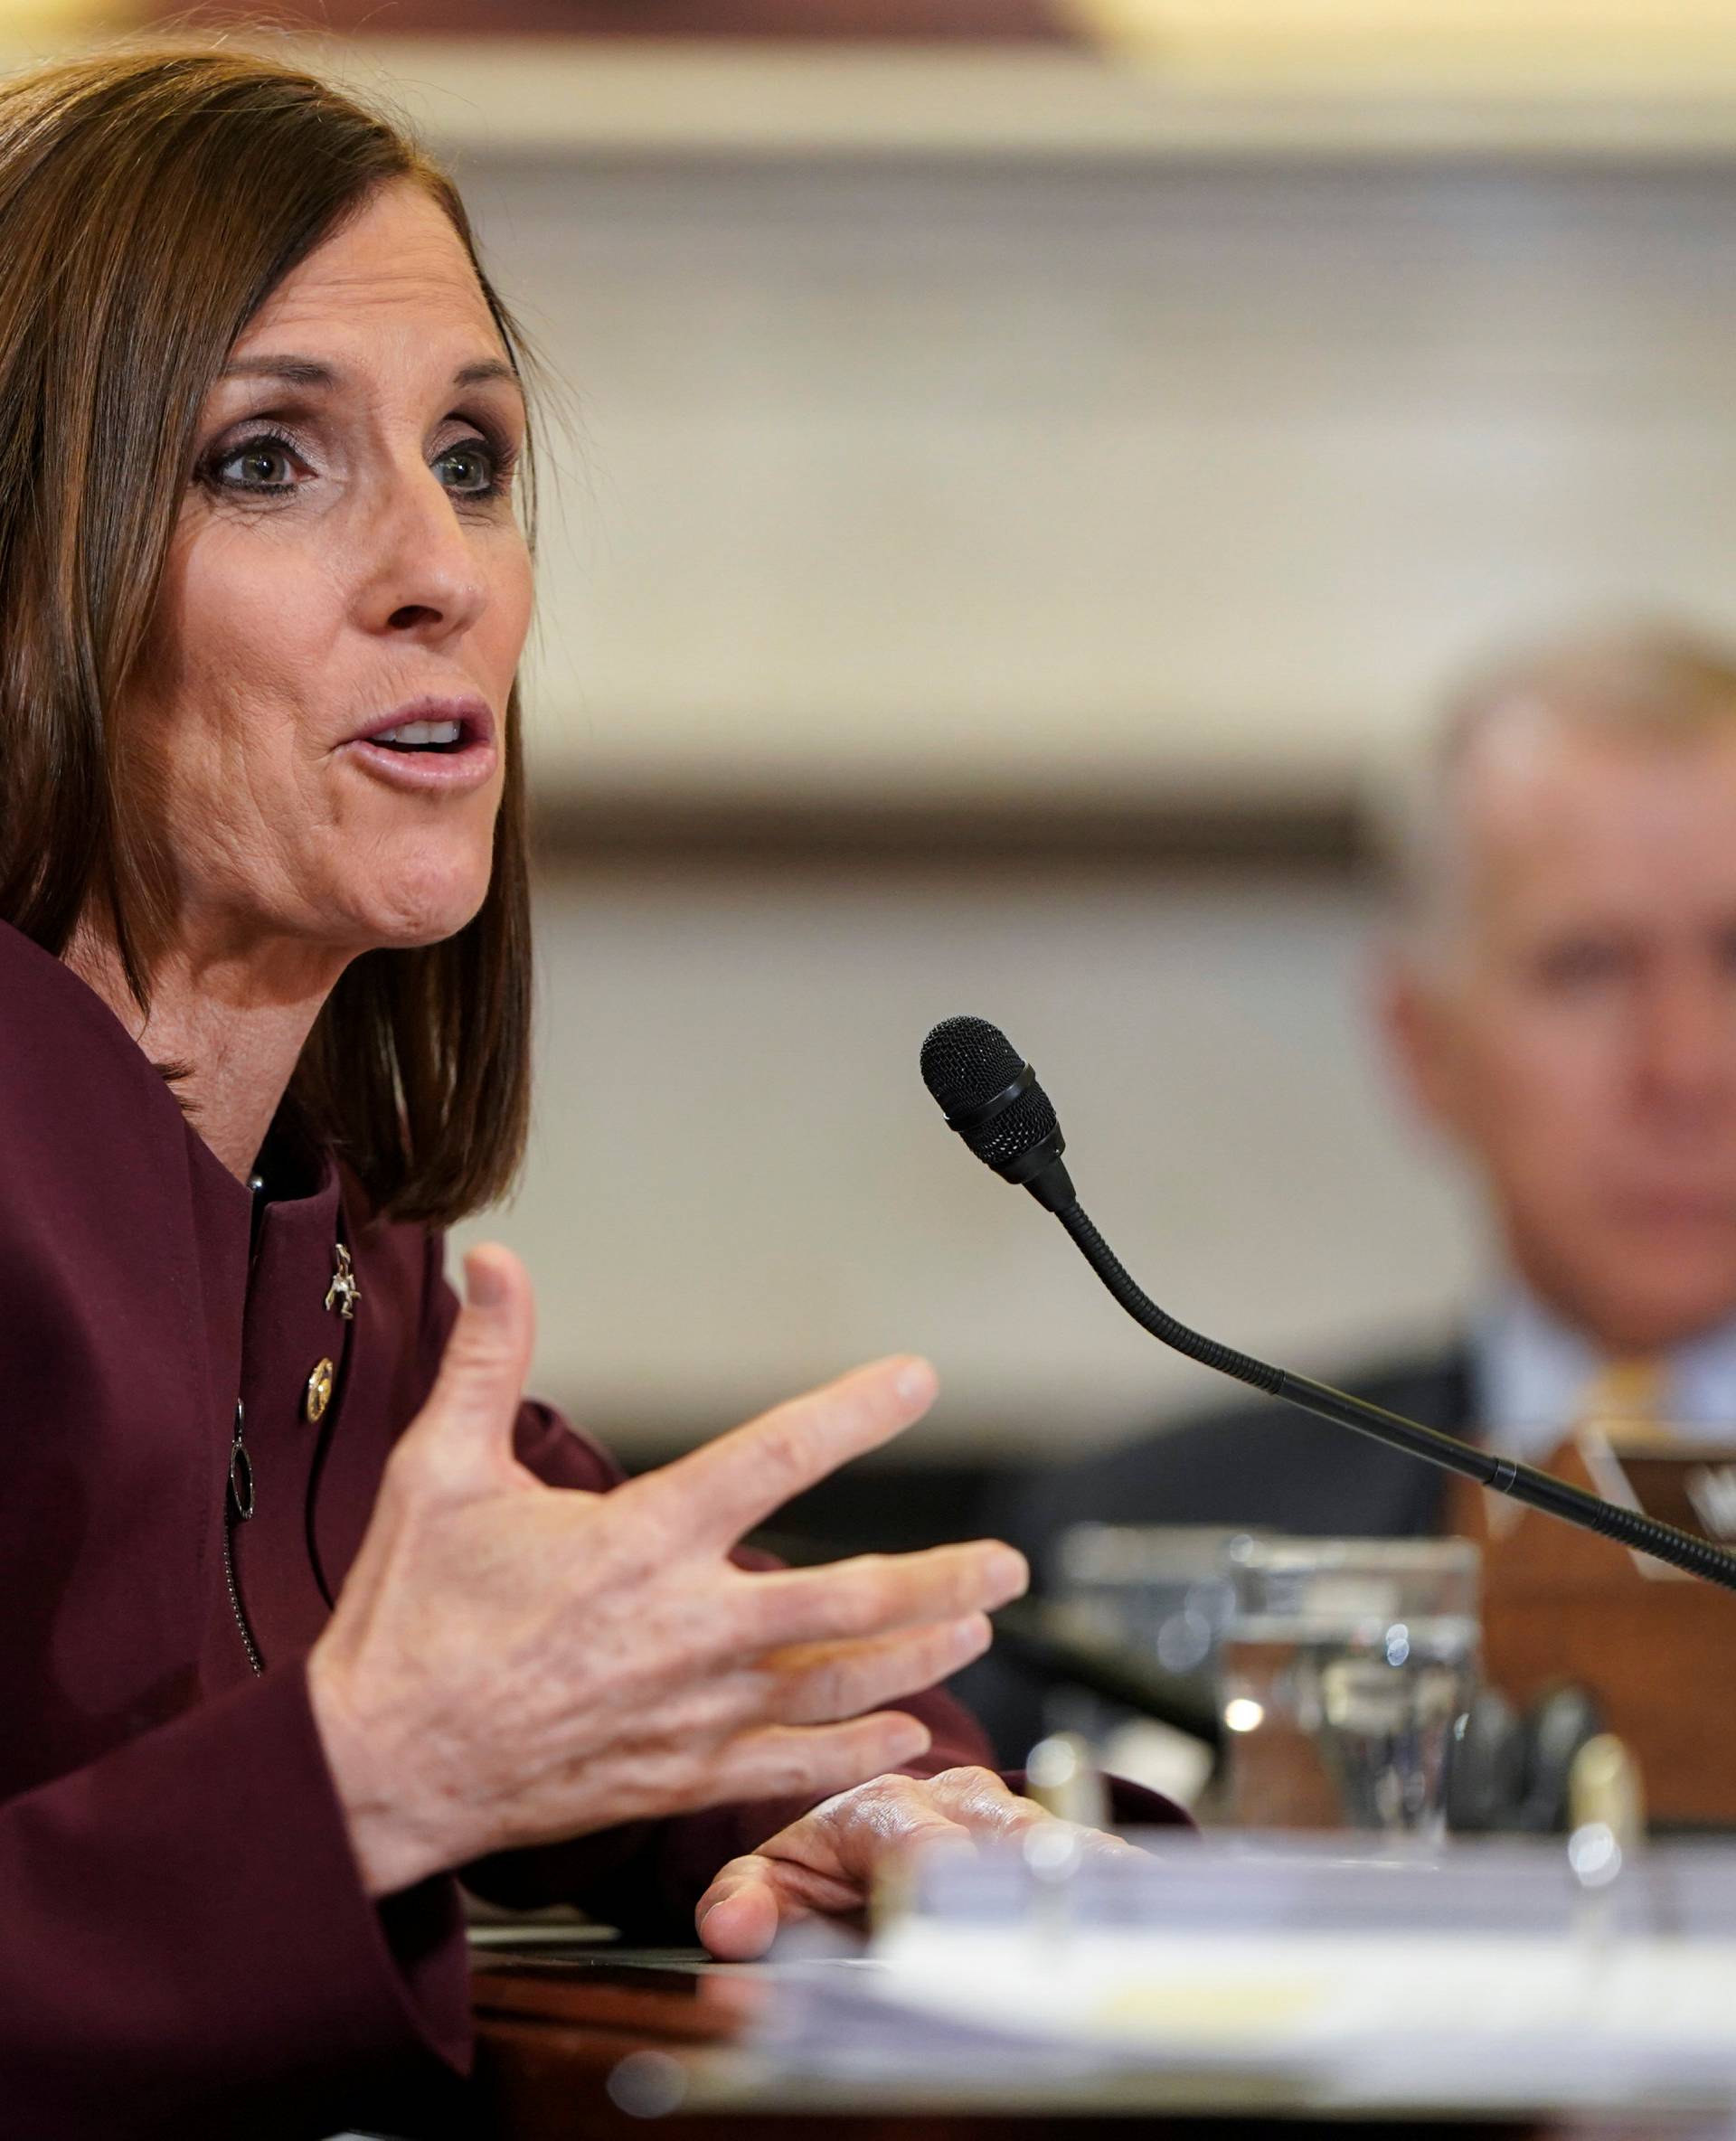 U.S. Senator McSally speaks during Senate Armed Services Subcommittee hearing on preventing sexual assault on Capitol Hill in Washington